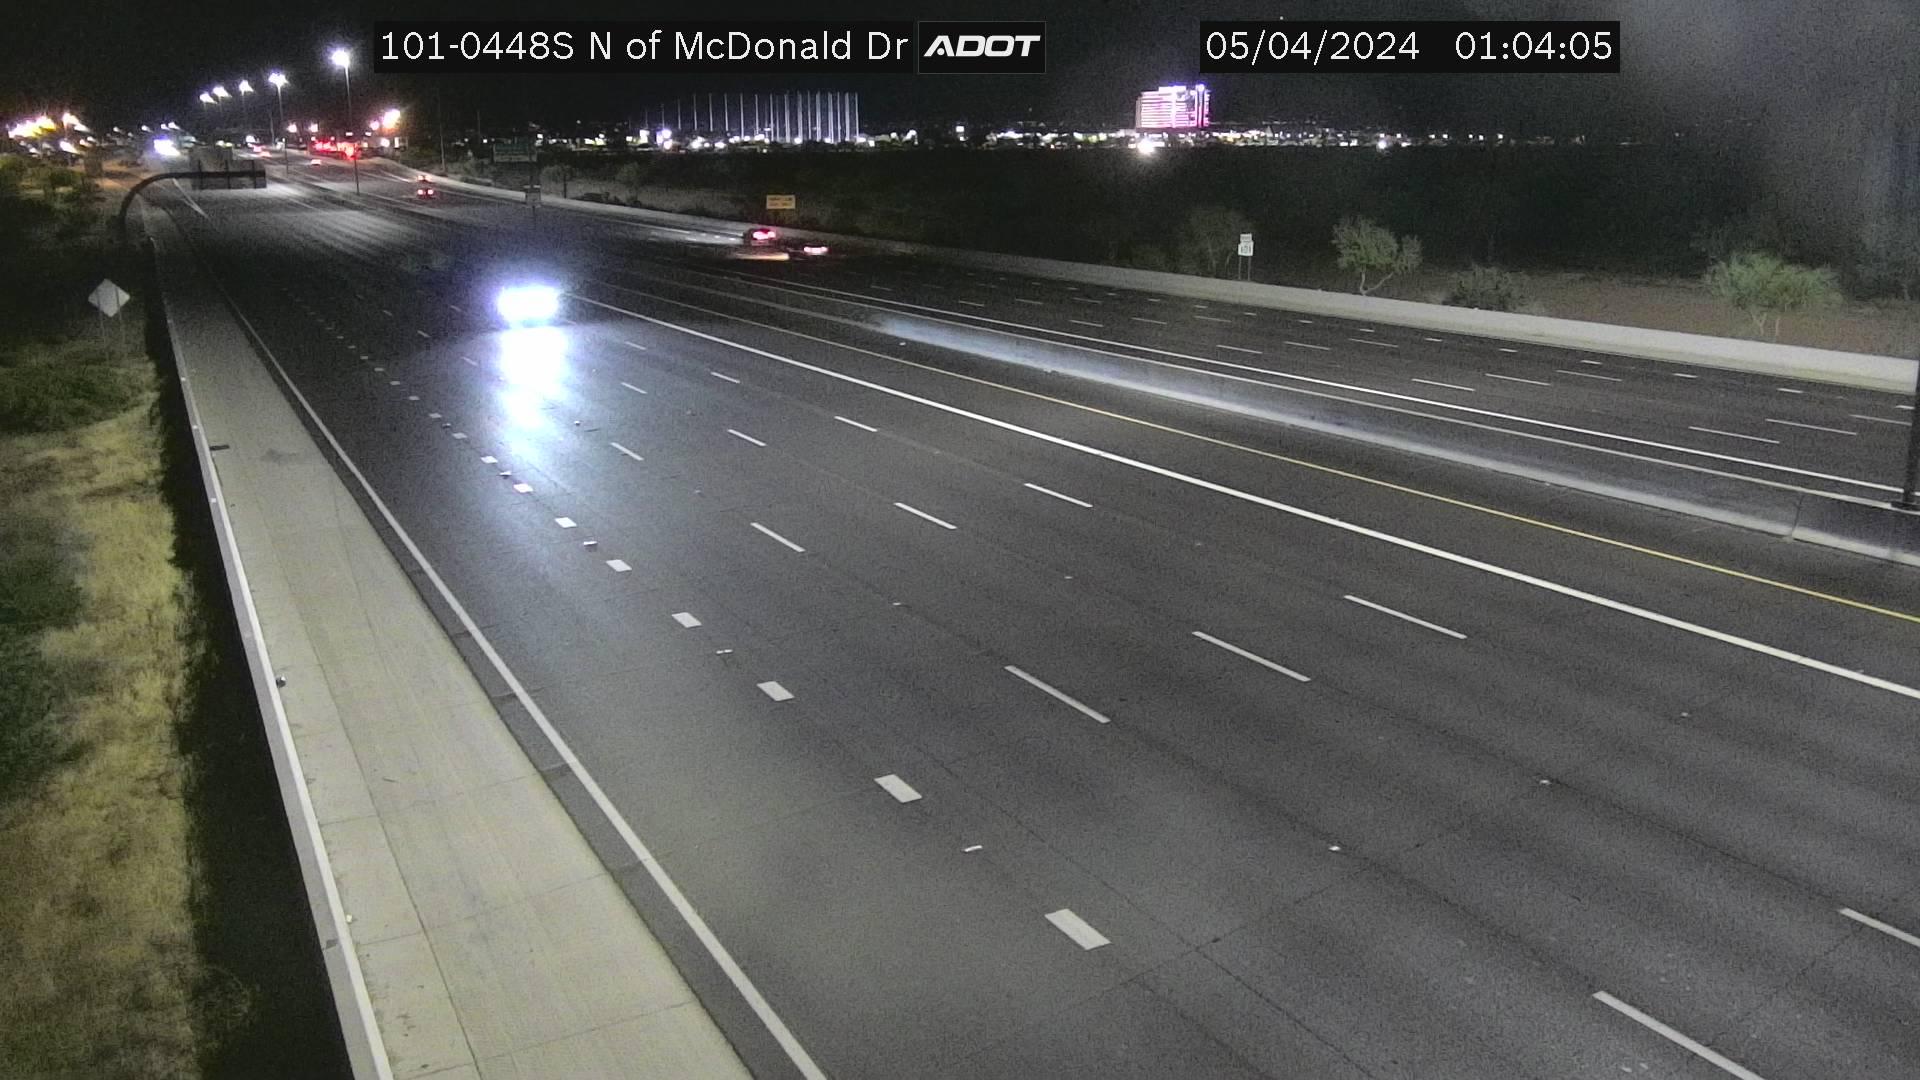 Traffic Cam Paradise Valley › South: L-101 SB 44.88 @N of McDonald Player